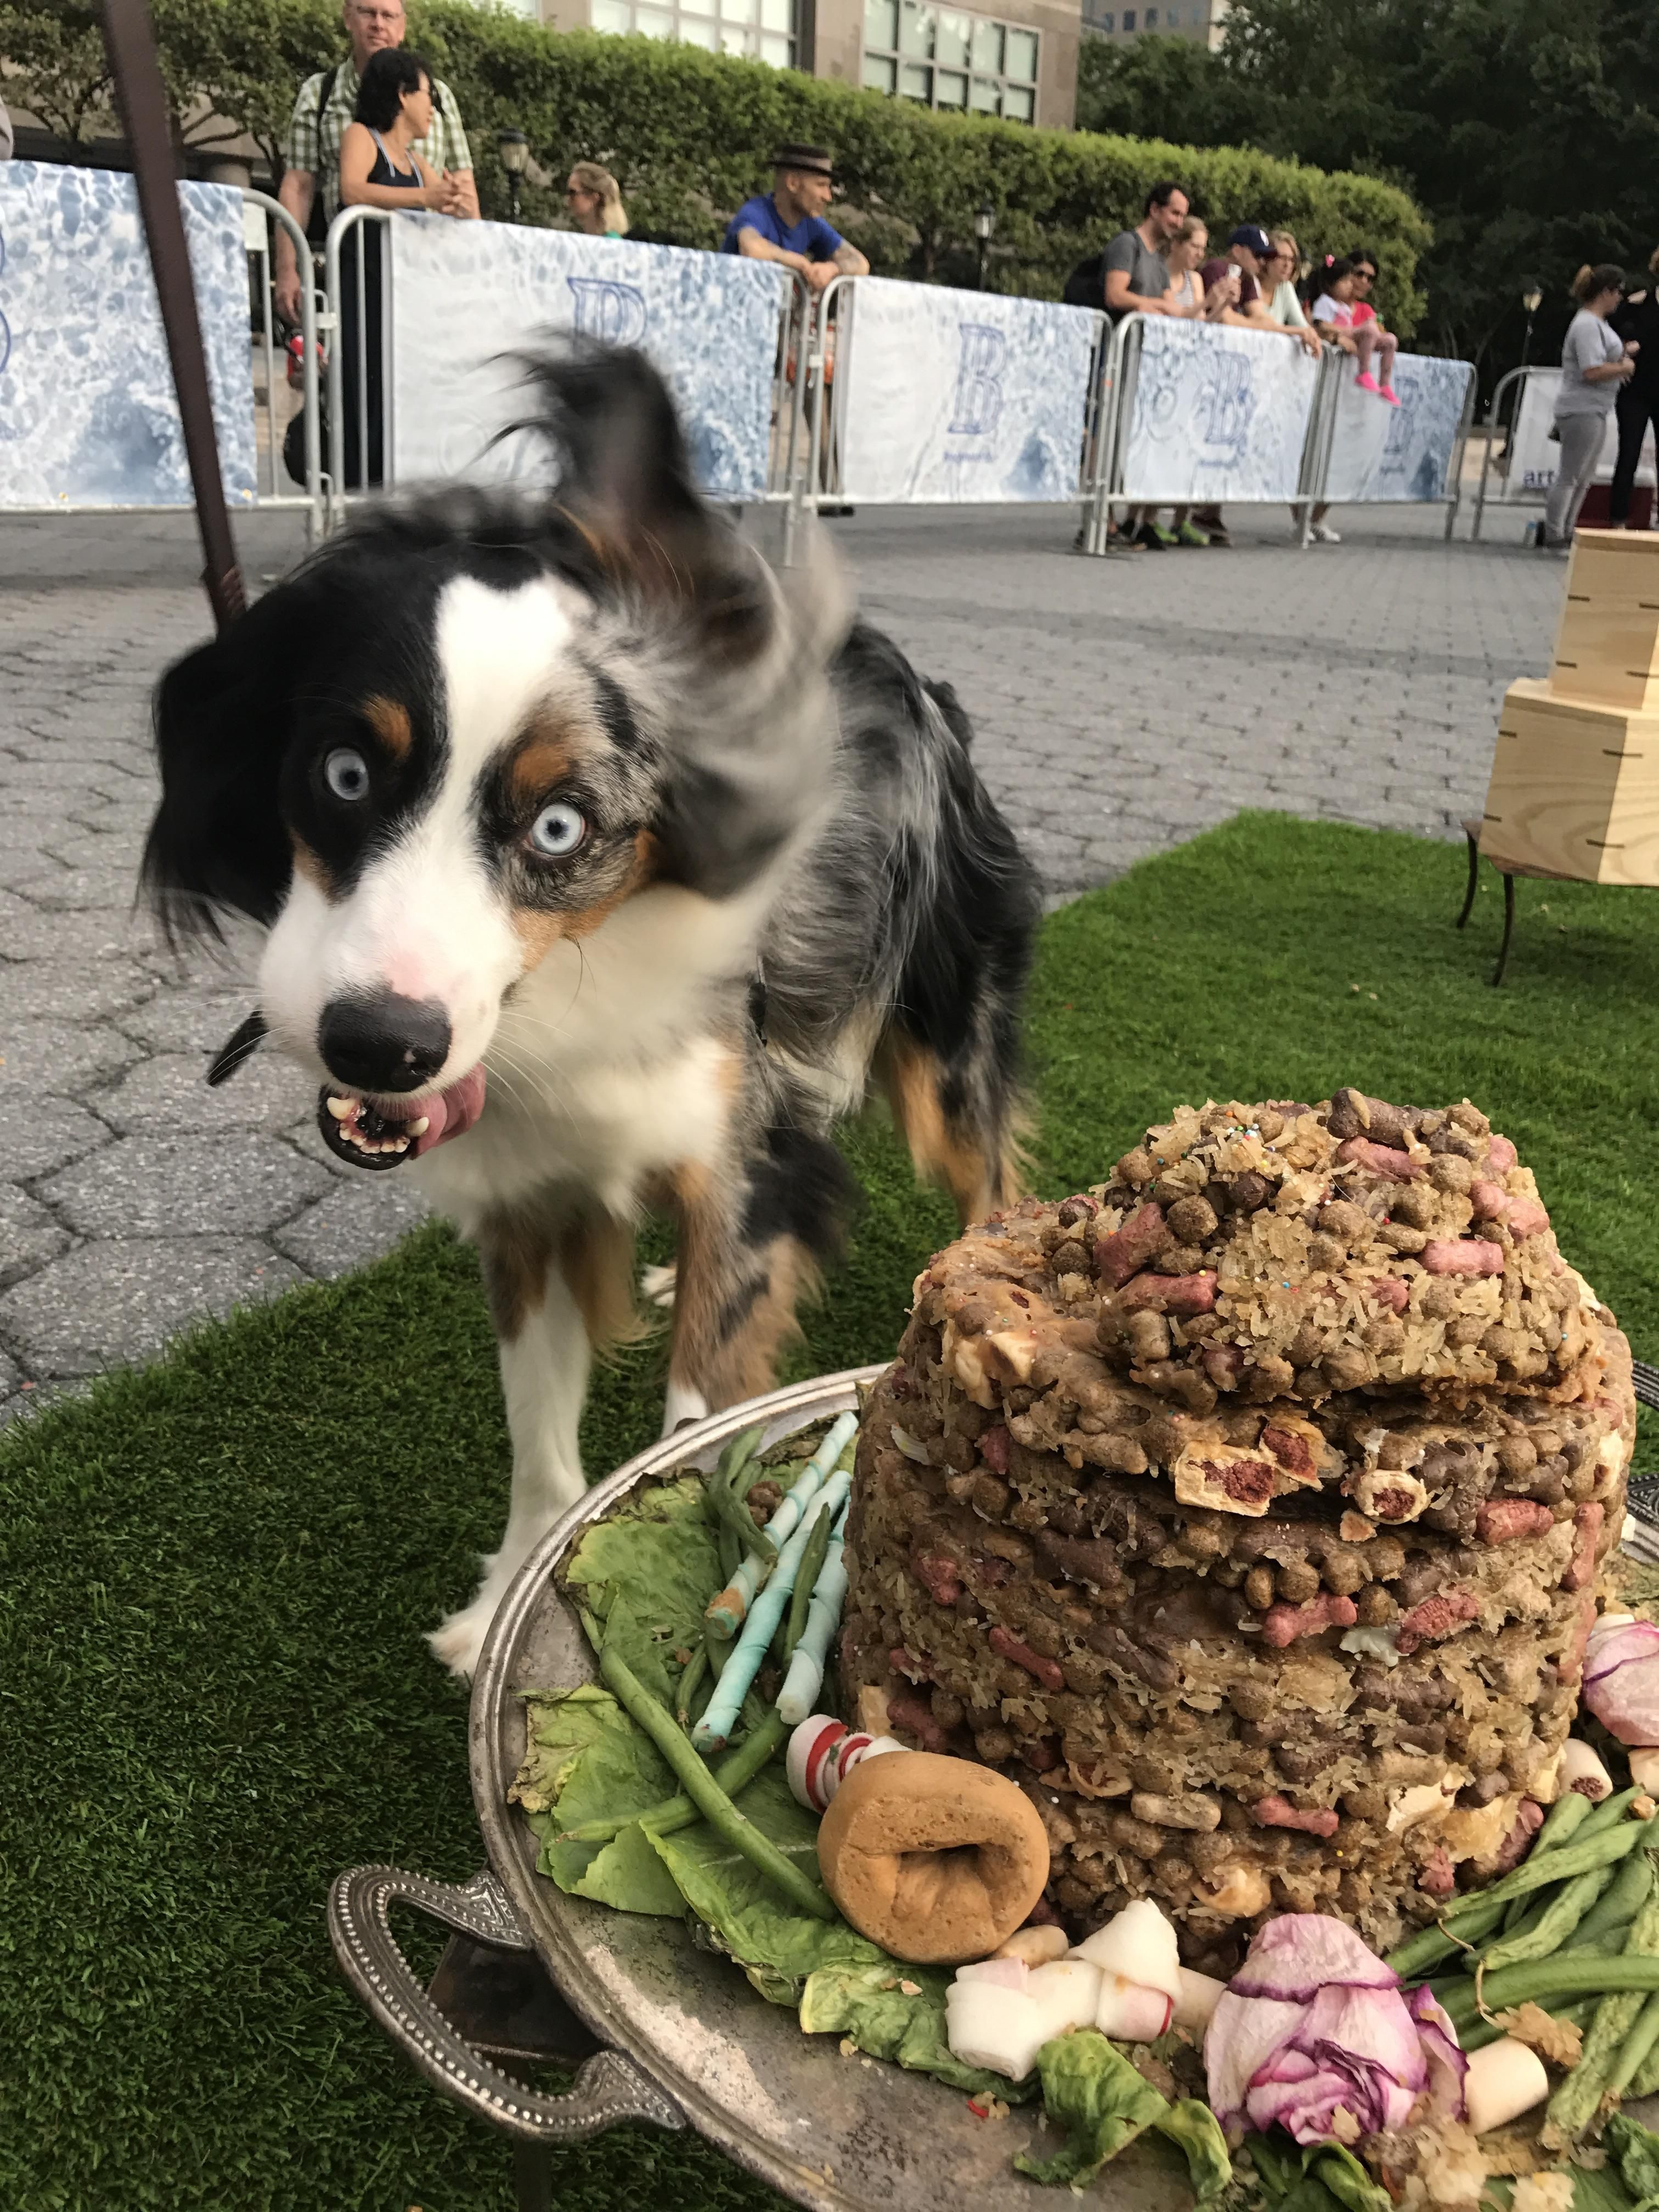 My dog excited to see this mountain of food.